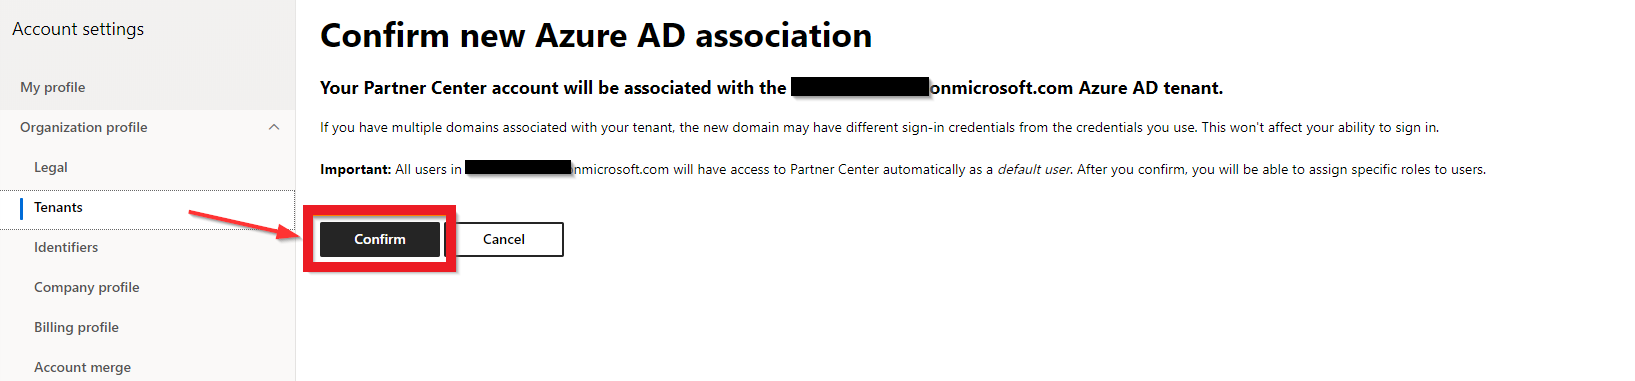 Screenshot of the Confirm button on the Confirm new Azure AD association pane.